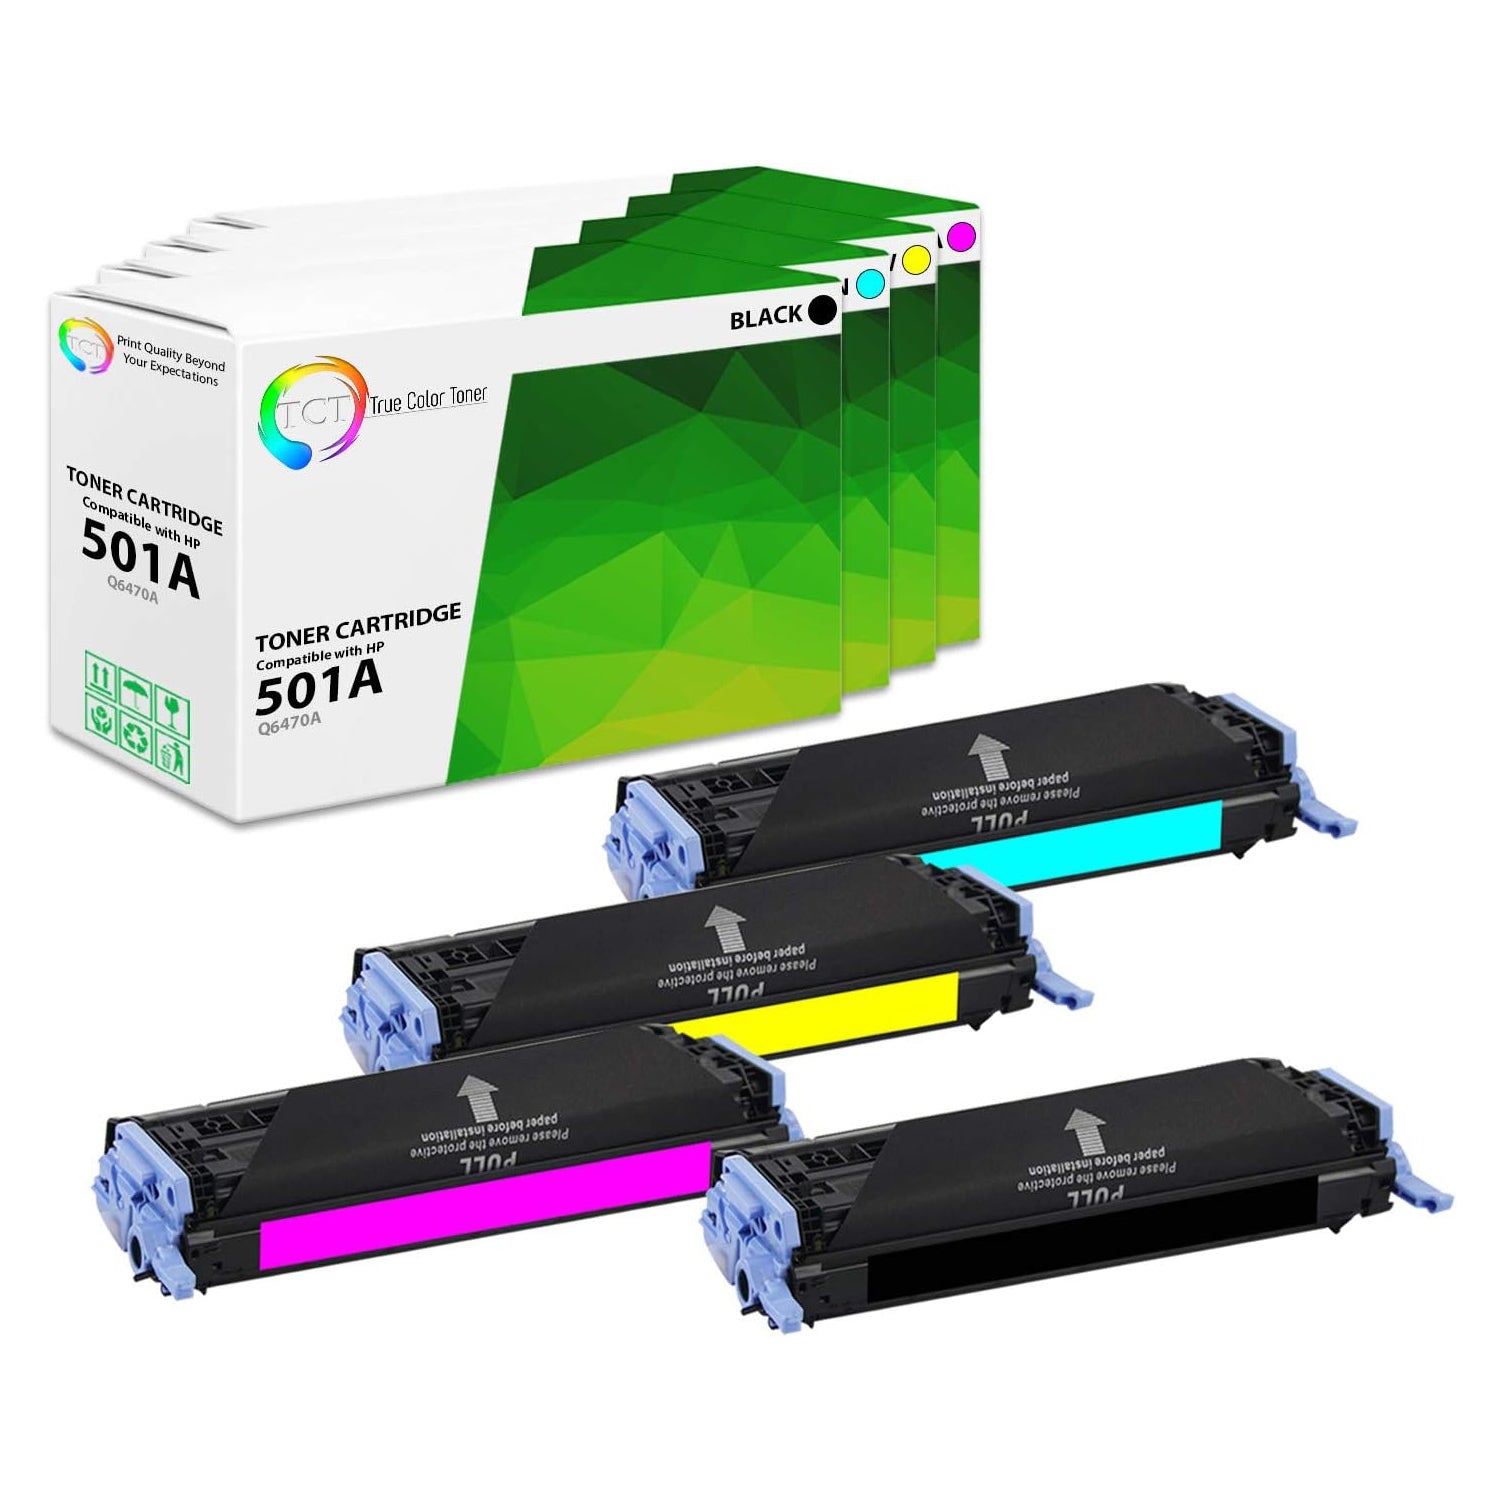 TCT Compatible Toner Cartridge Replacement for the HP 501A Series - 4 Pack (BK, C, M, Y)